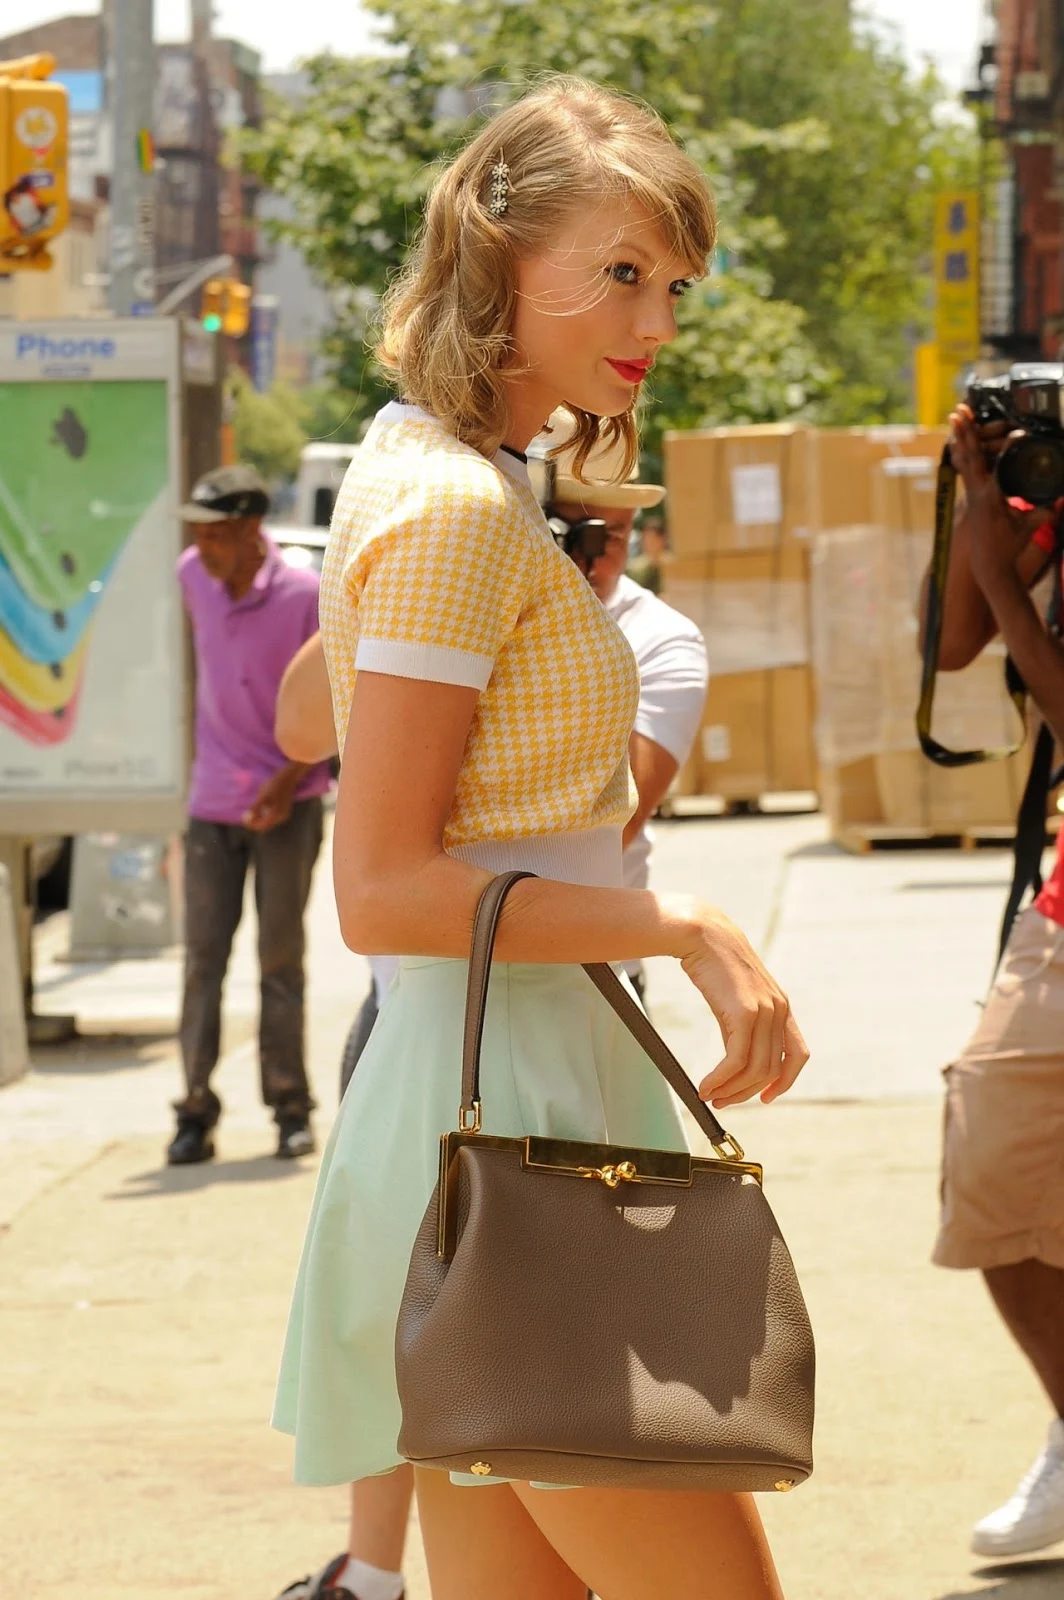 Taylor Swift channels the 50s in a vintage inspired pastel look in NY